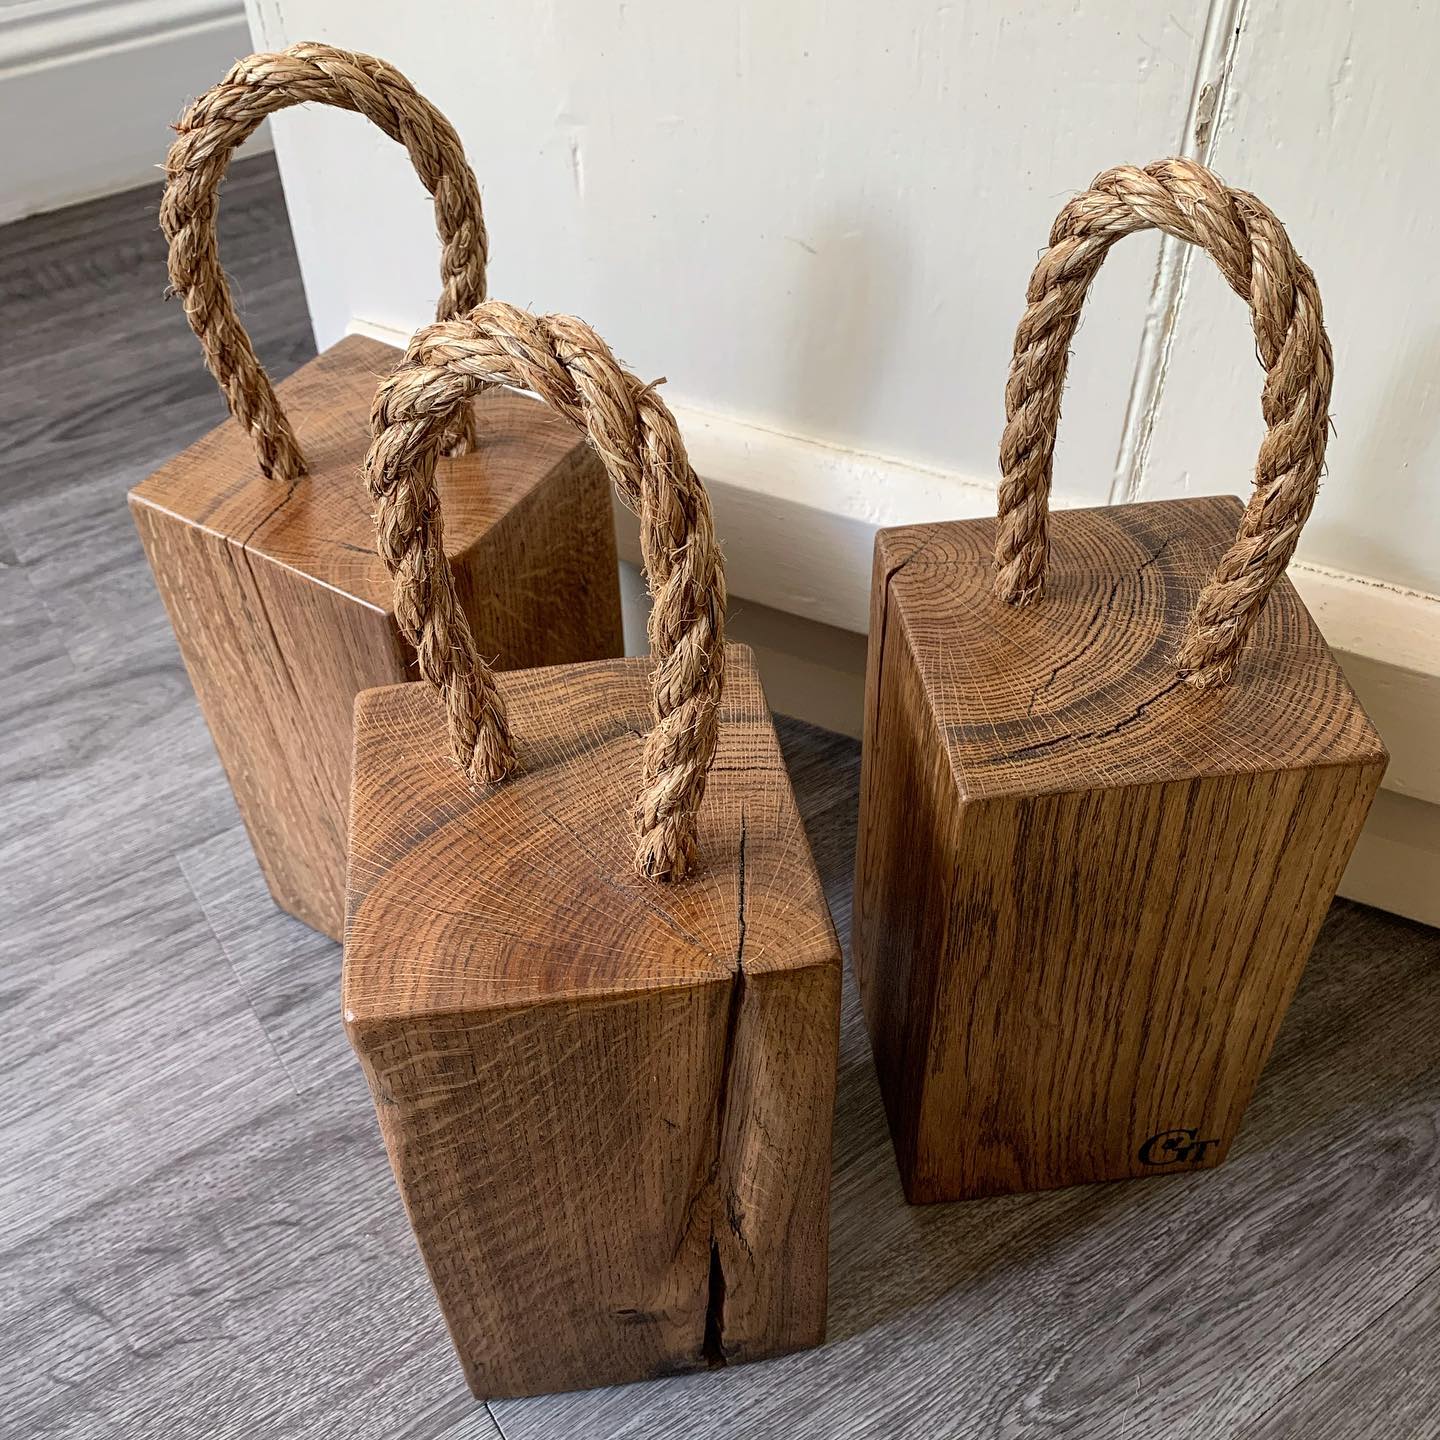 We have just created a new product on our website ?.Each one of these doorstops is unique, made from some of our most characterful pieces of oak. ..All options can be found at www.gingerandtweed.com or by following the product link. ...#character #naturalmaterials #oak #beautifulwood #rustic #doorstop #newproduct #unique #handcrafted #homewares #gingerandtweed